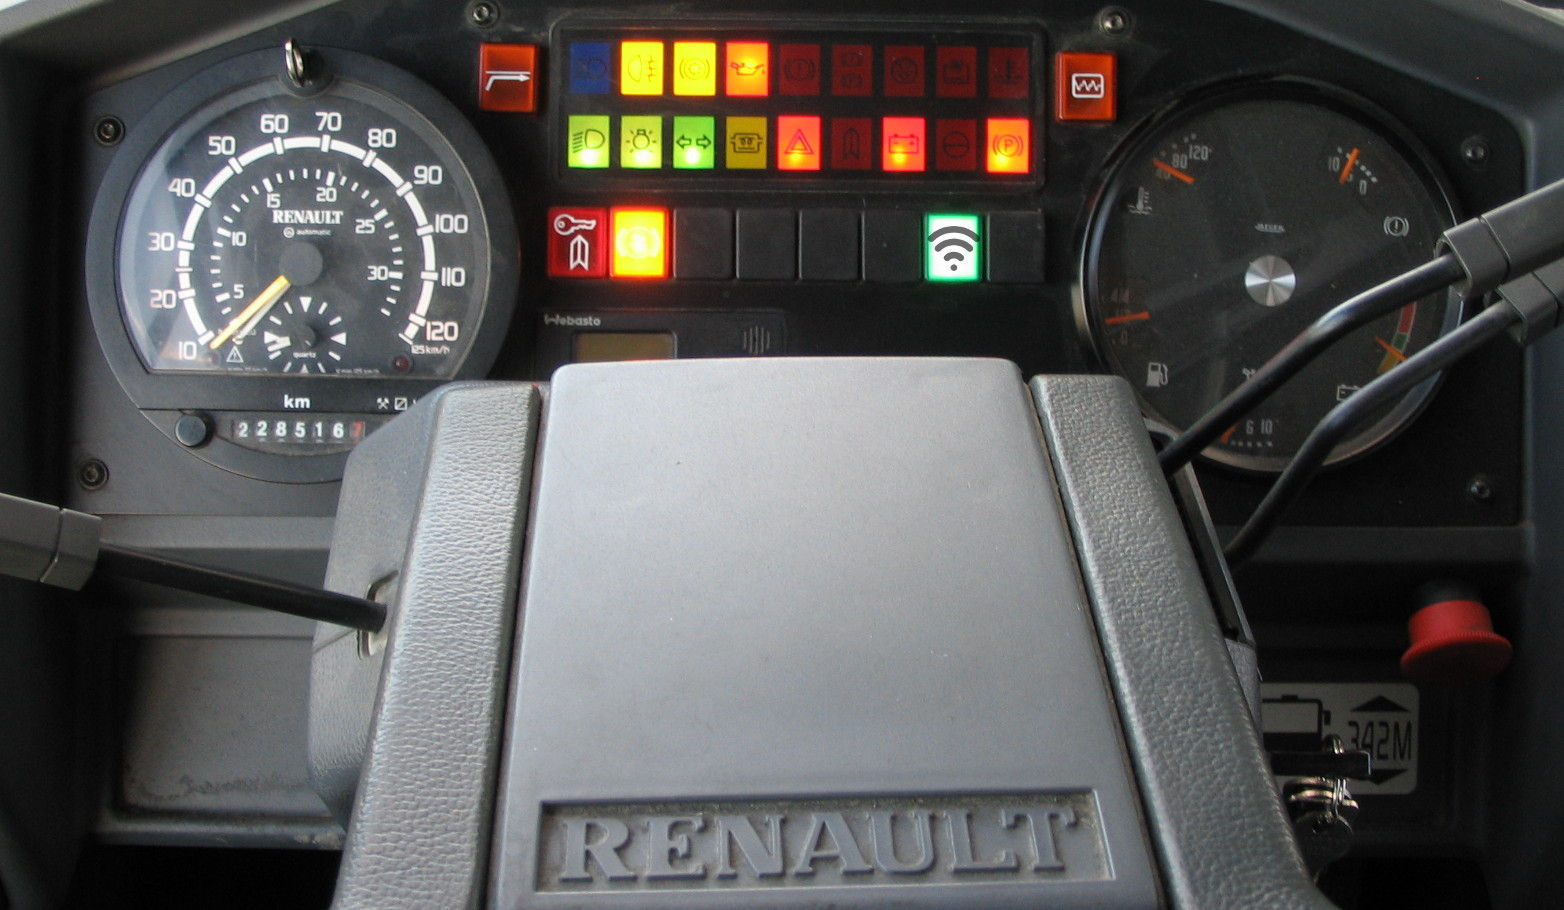 Enlarged view: Renault Tracer dashboard (CC0 1.0 by J. Bertrand via Wikimedia Commons / refined by o-media.org)